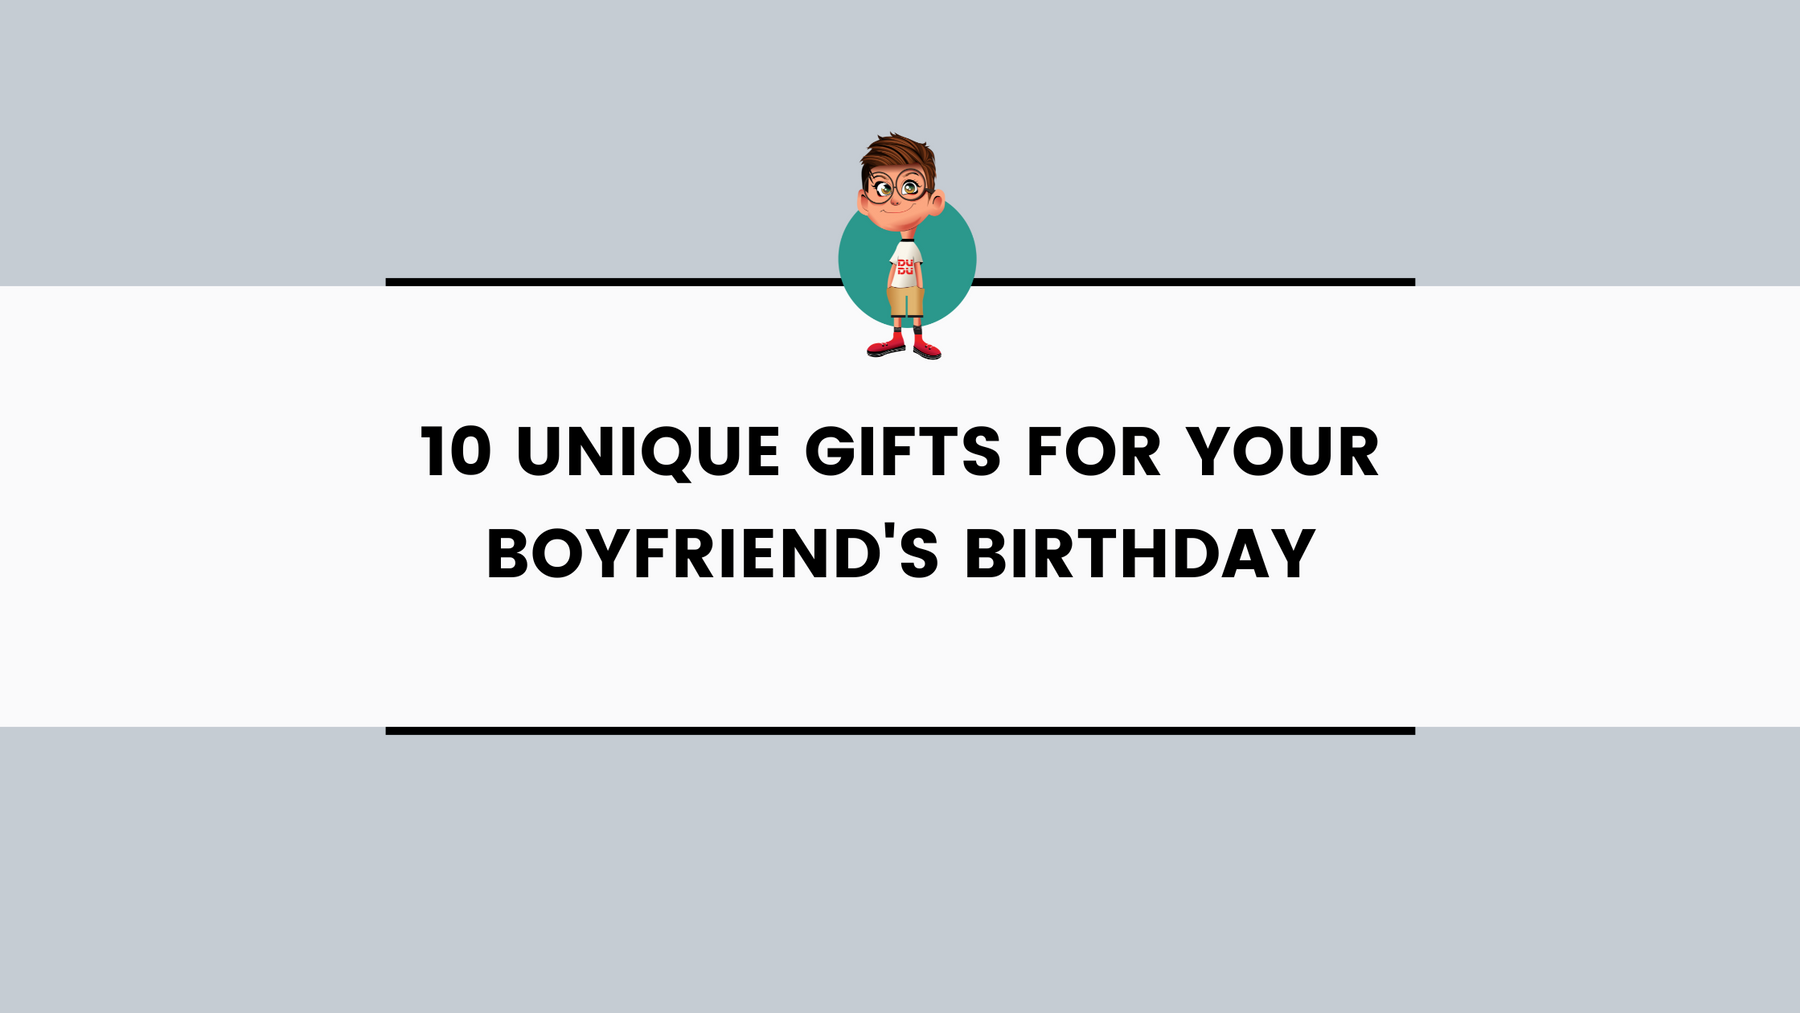 10 Unique Gifts for Your Boyfriend's Birthday